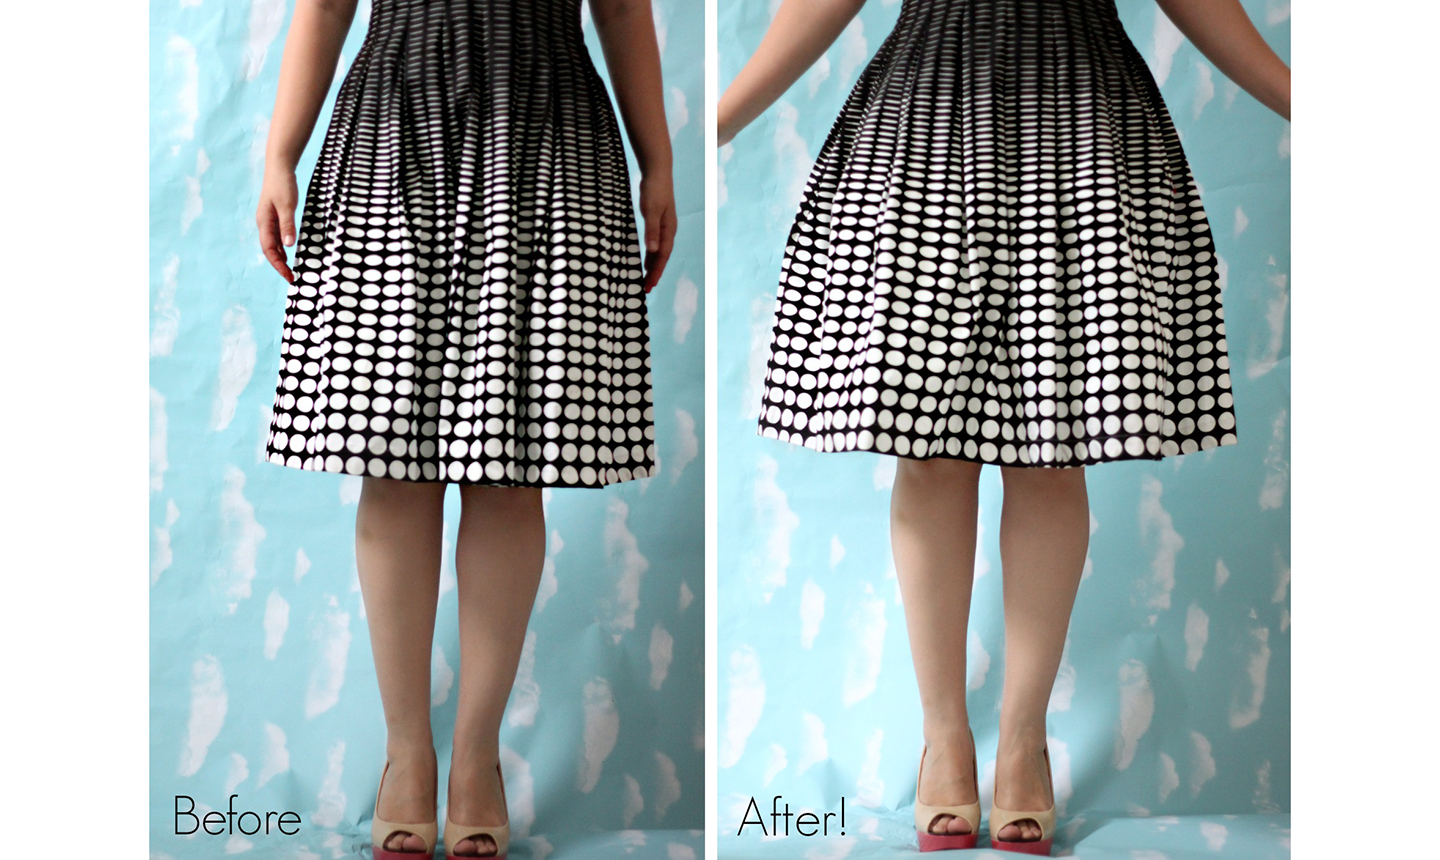 3 ways to sew Sari petticoat skirts– EASY DIY Patterns and instructions for  underskirts - SewGuide